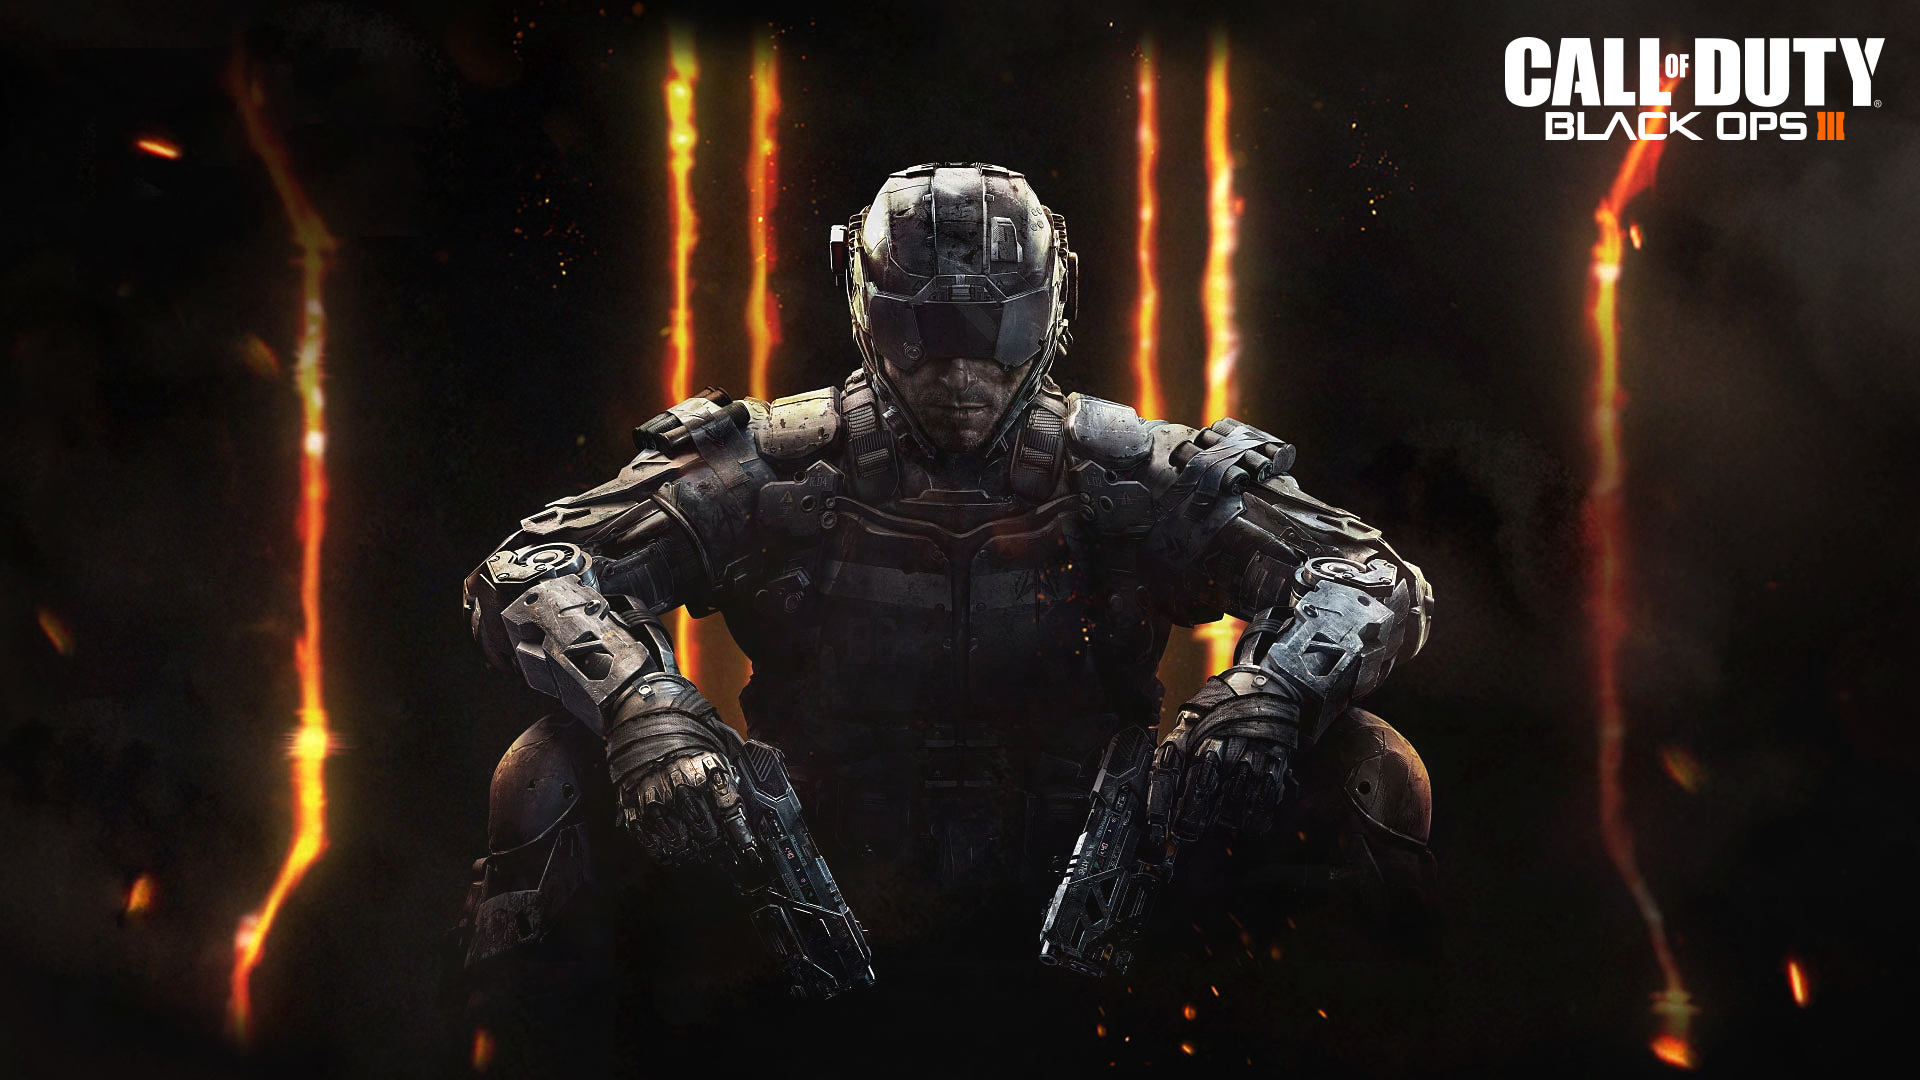 Download Black Ops 3 Wallpaper HD We provide the best collection of